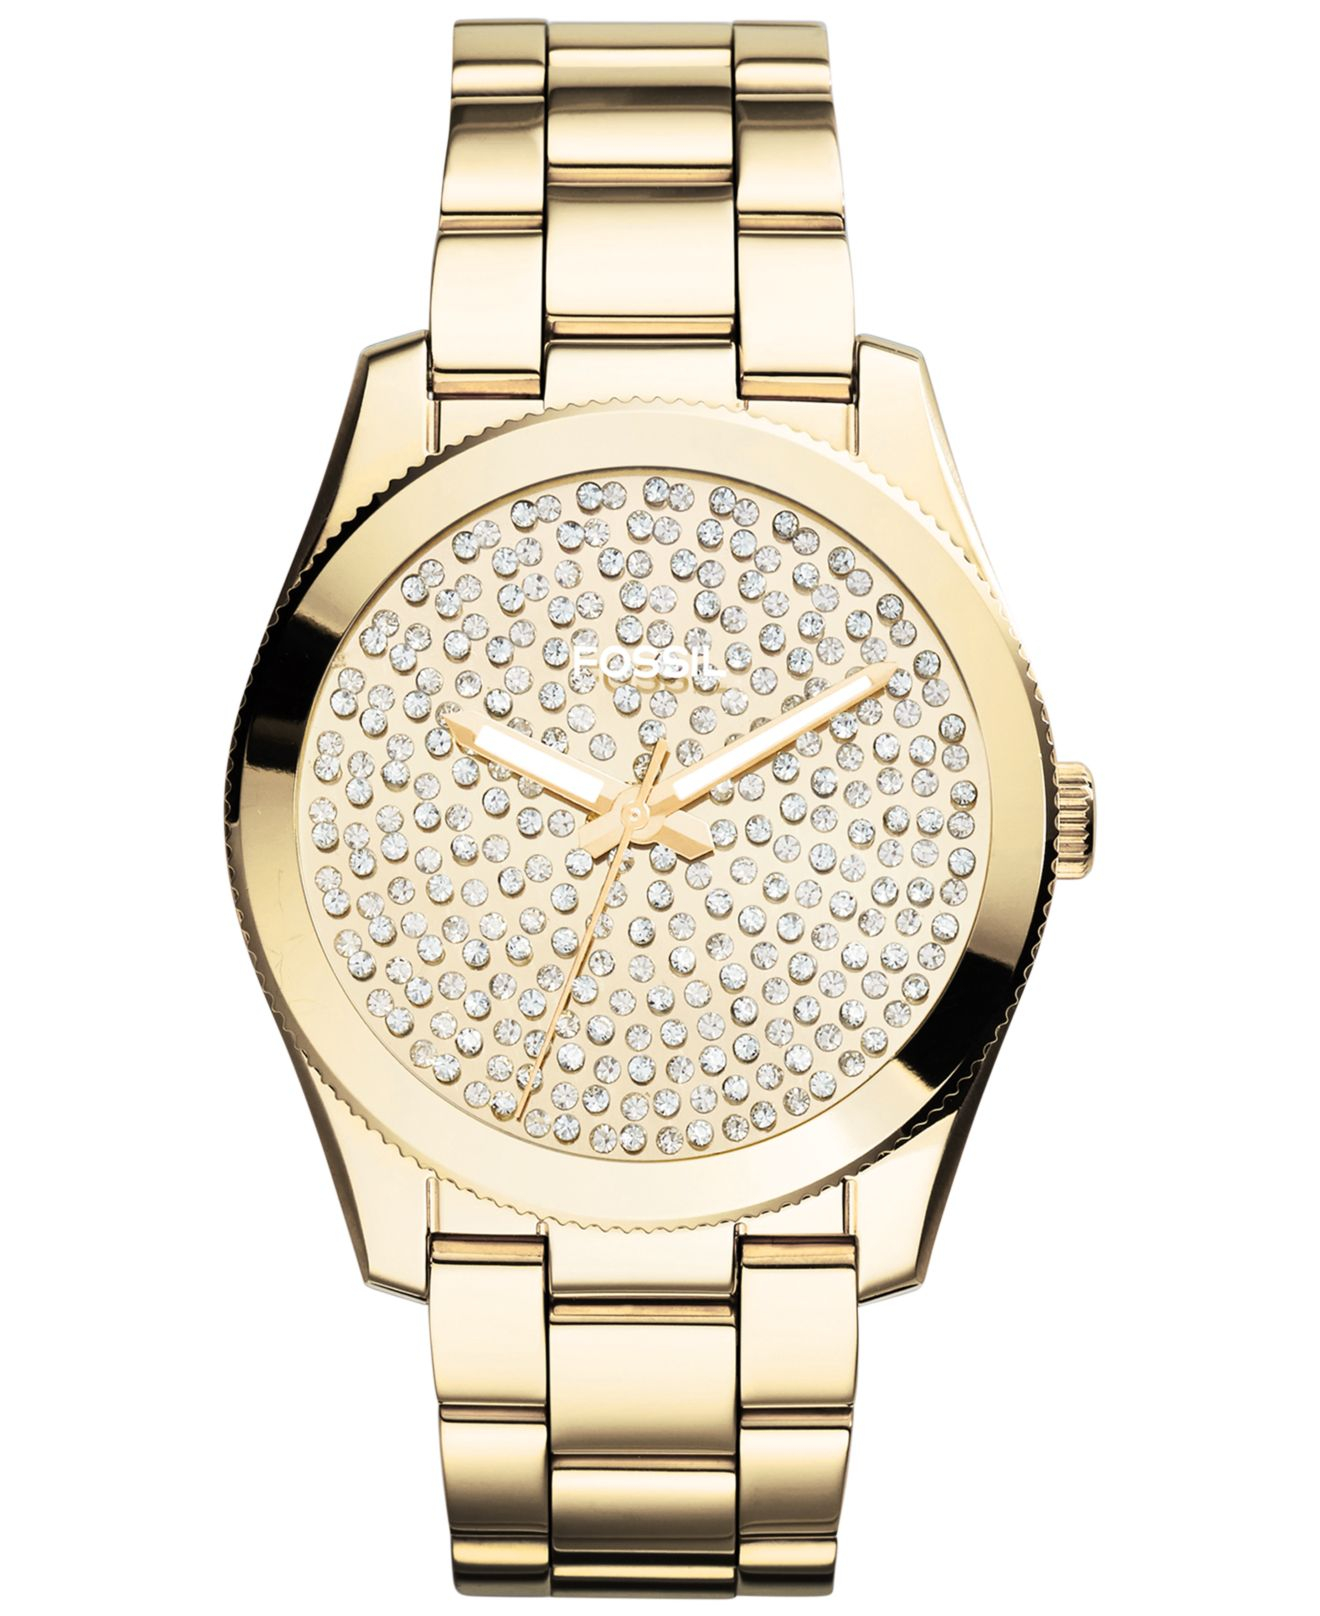 Lyst - Fossil Women'S Perfect Boyfriend Gold-Tone Stainless Steel ...